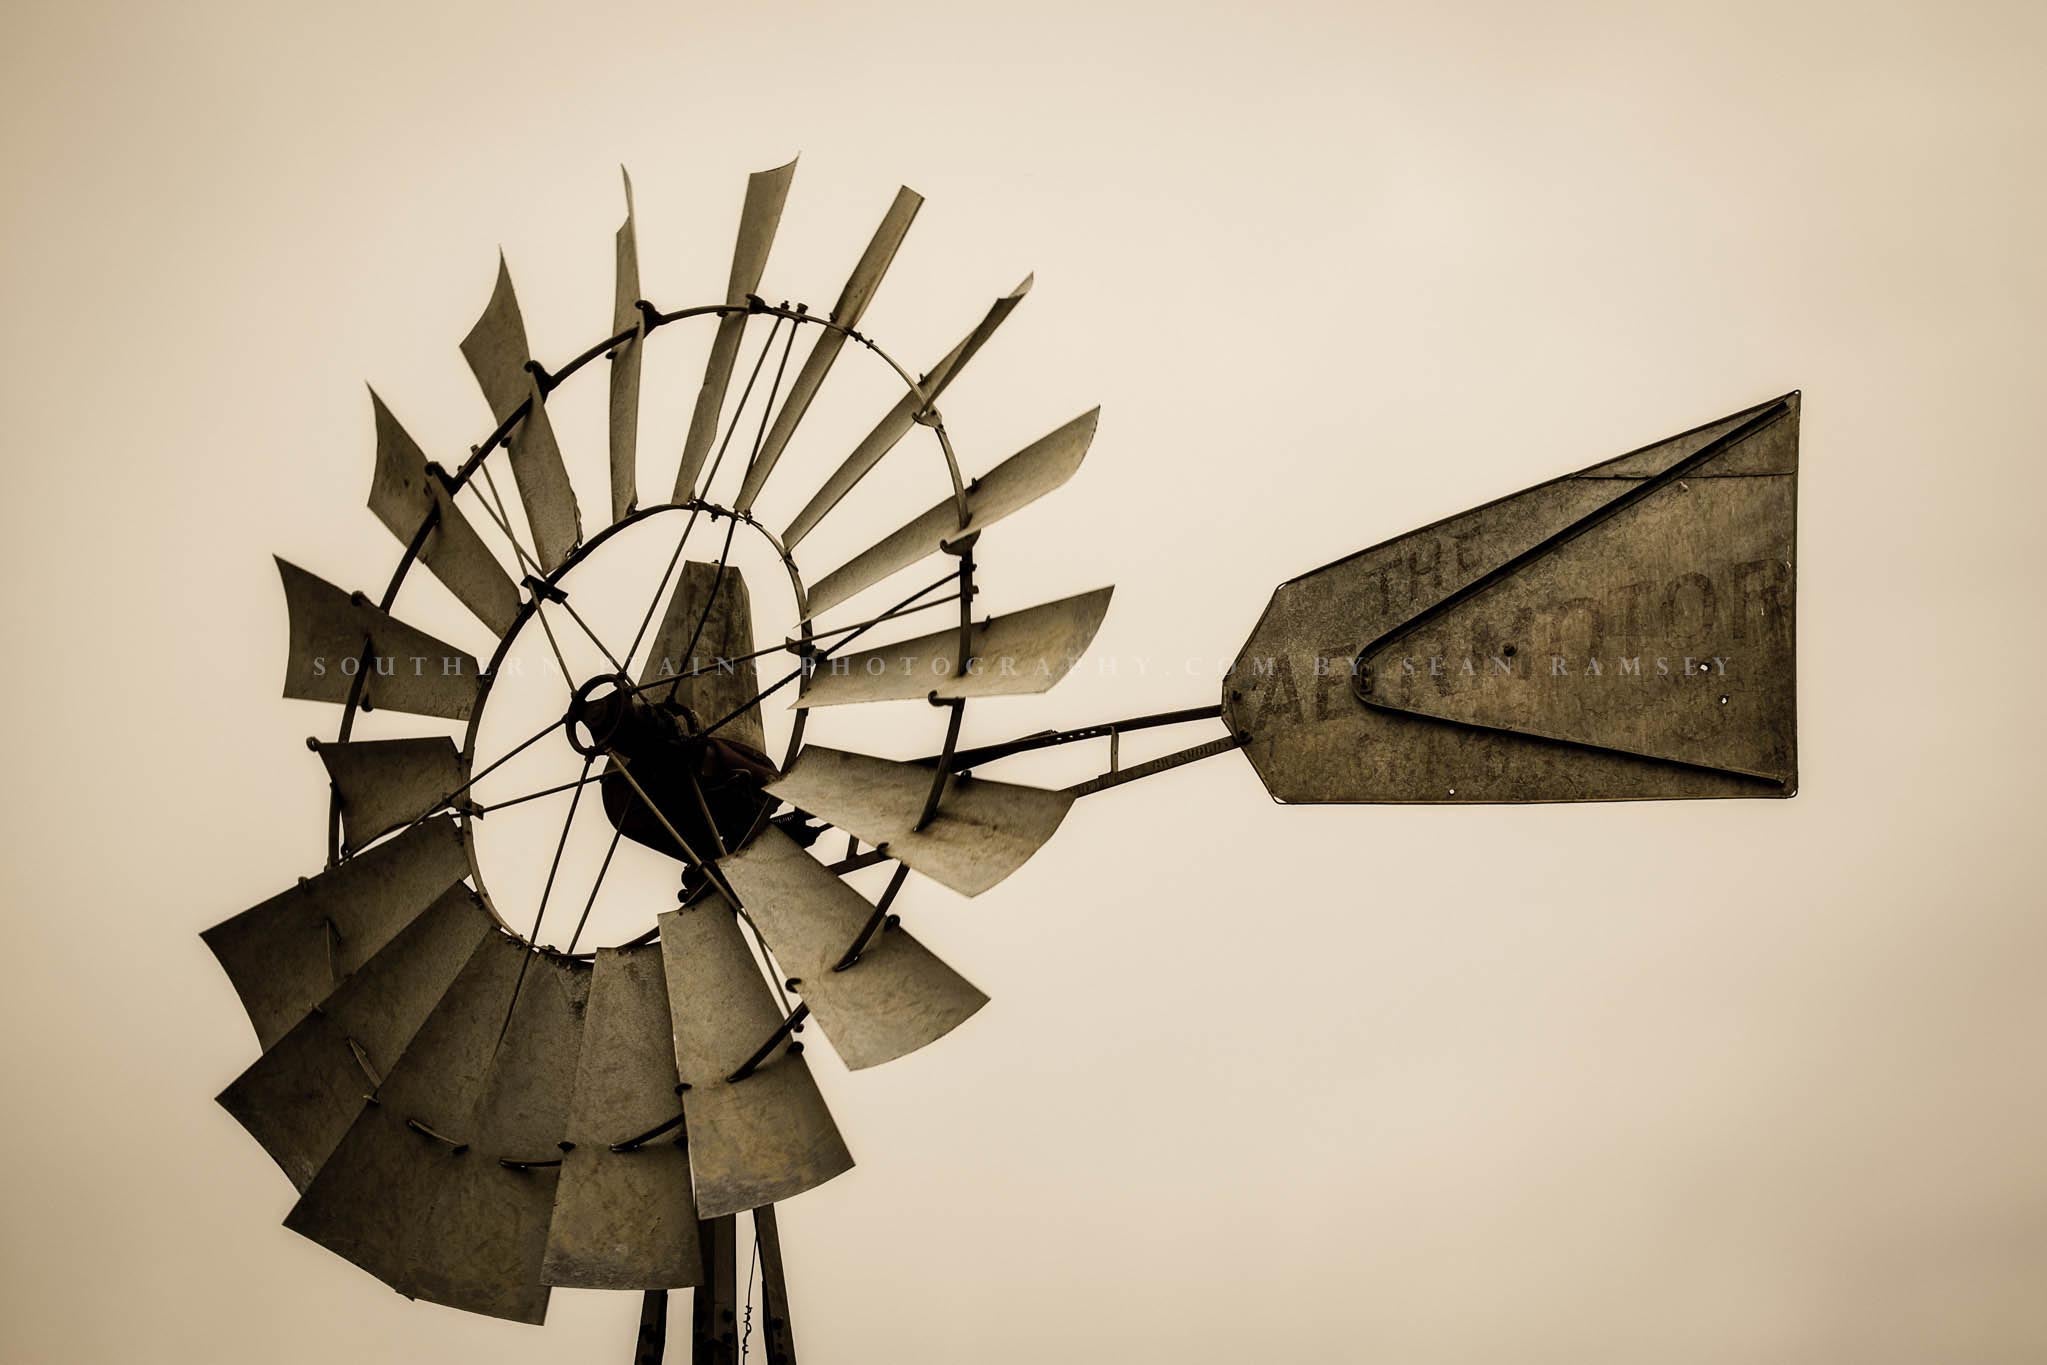 Country photography print in sepia tone of an old windmill head and tail on a farm in Iowa by Sean Ramsey of Southern Plains Photography.